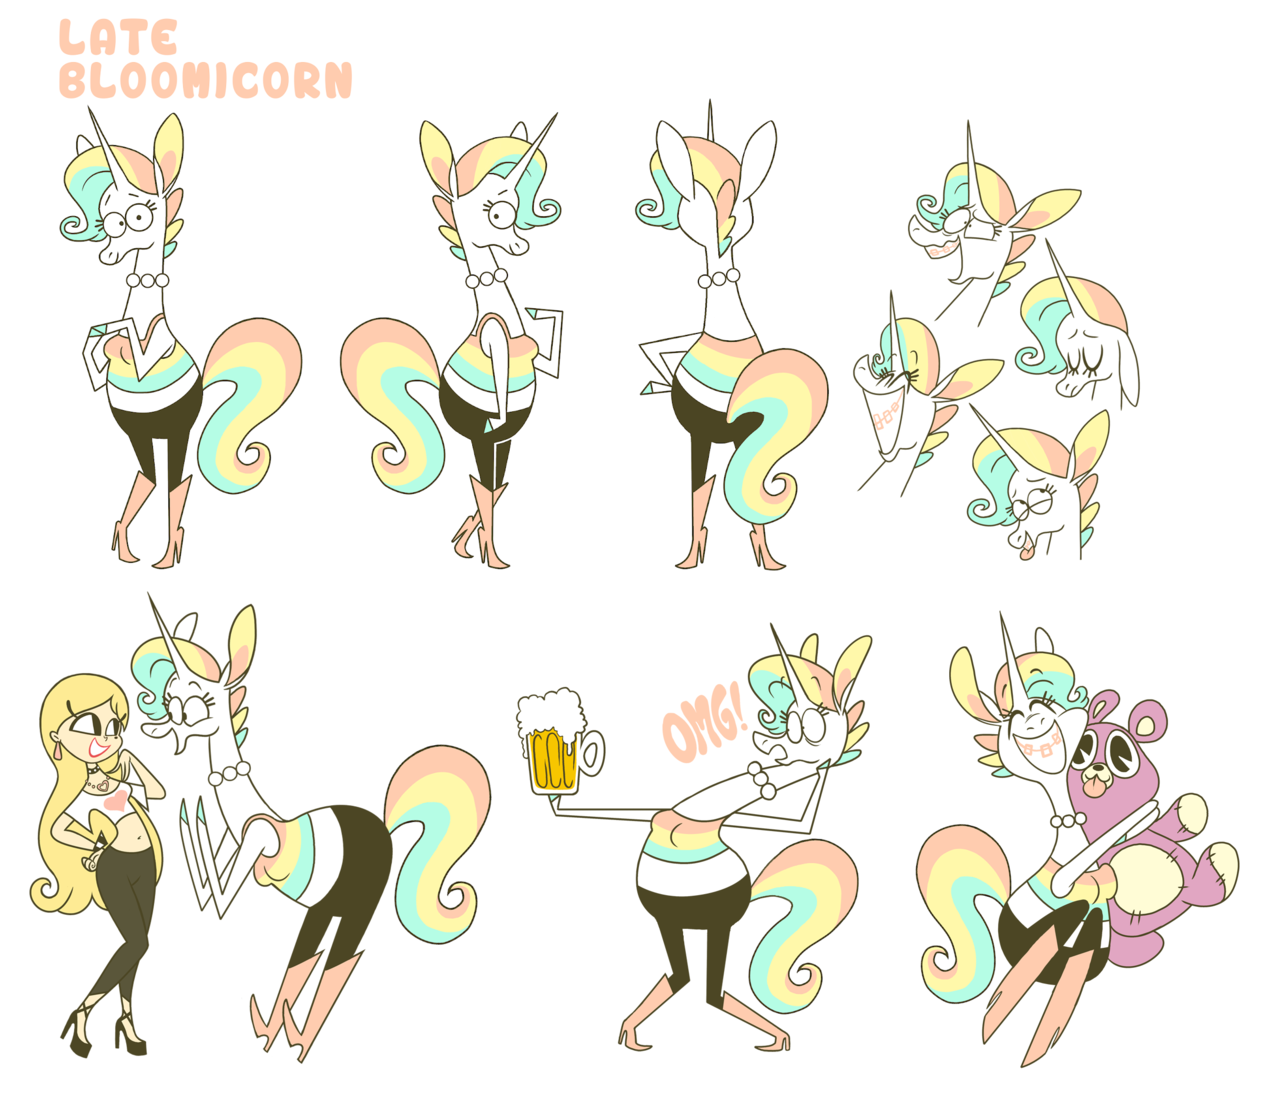 kyrakupetsky:  Full Late Bloomicorn character sheet for work as well as some unused